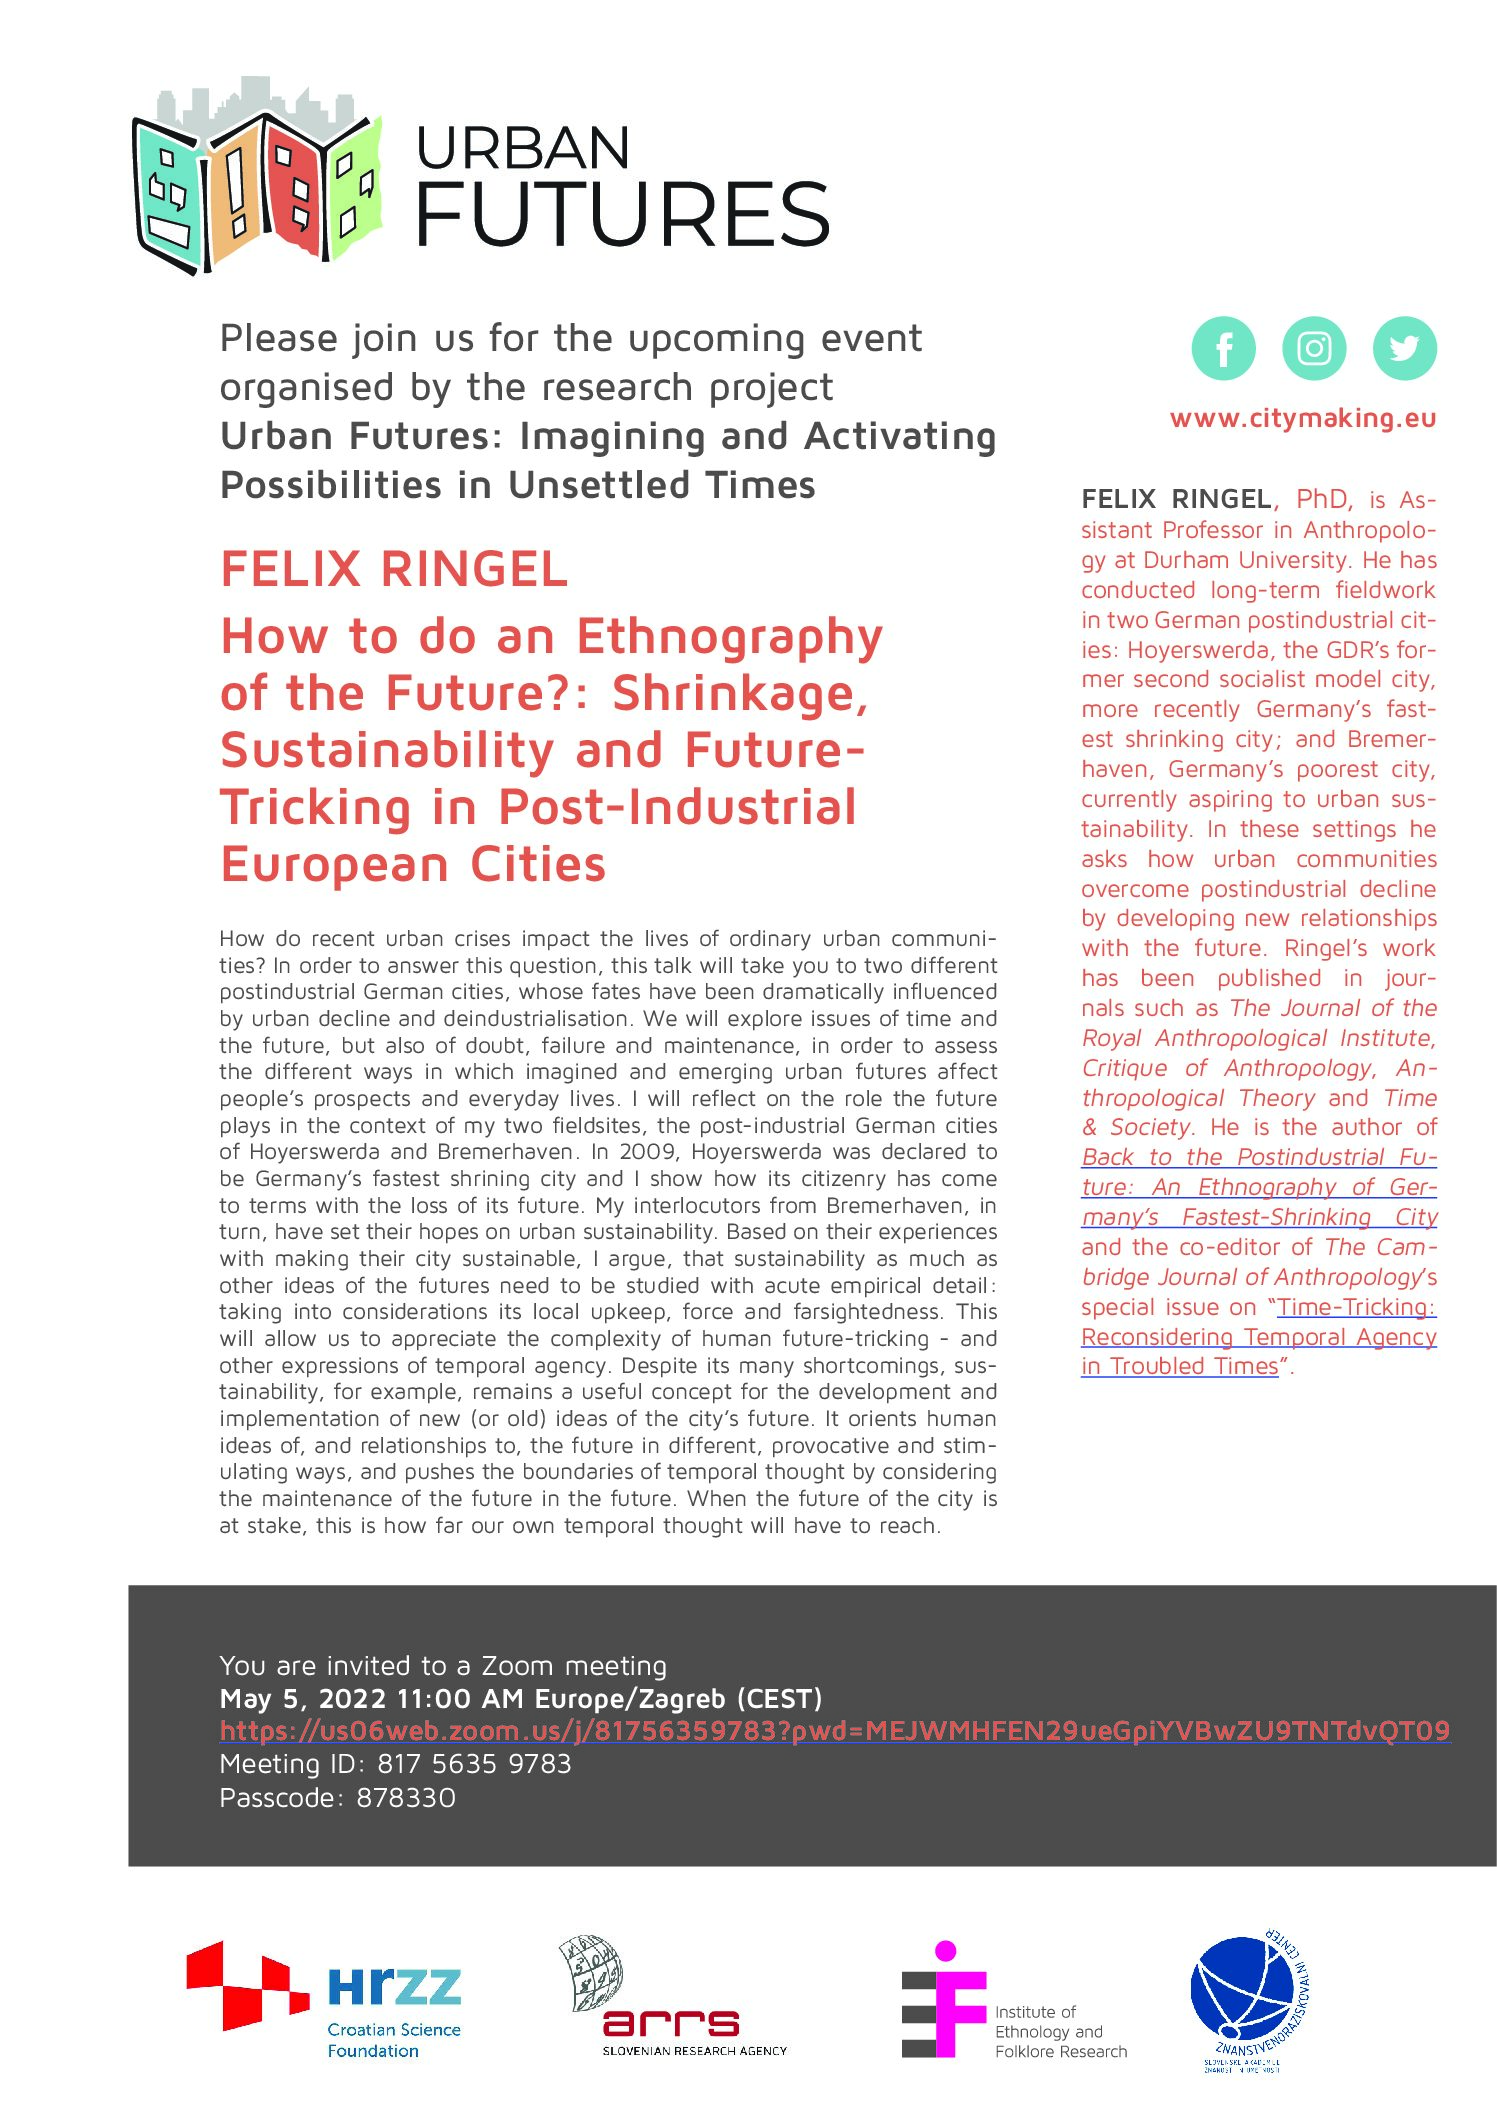 Urban Futures Talk FELIX RINGEL: How to do an Ethnography of the Future?: Shrinkage, Sustainability and Future-Tricking in Post-Industrial European Cities